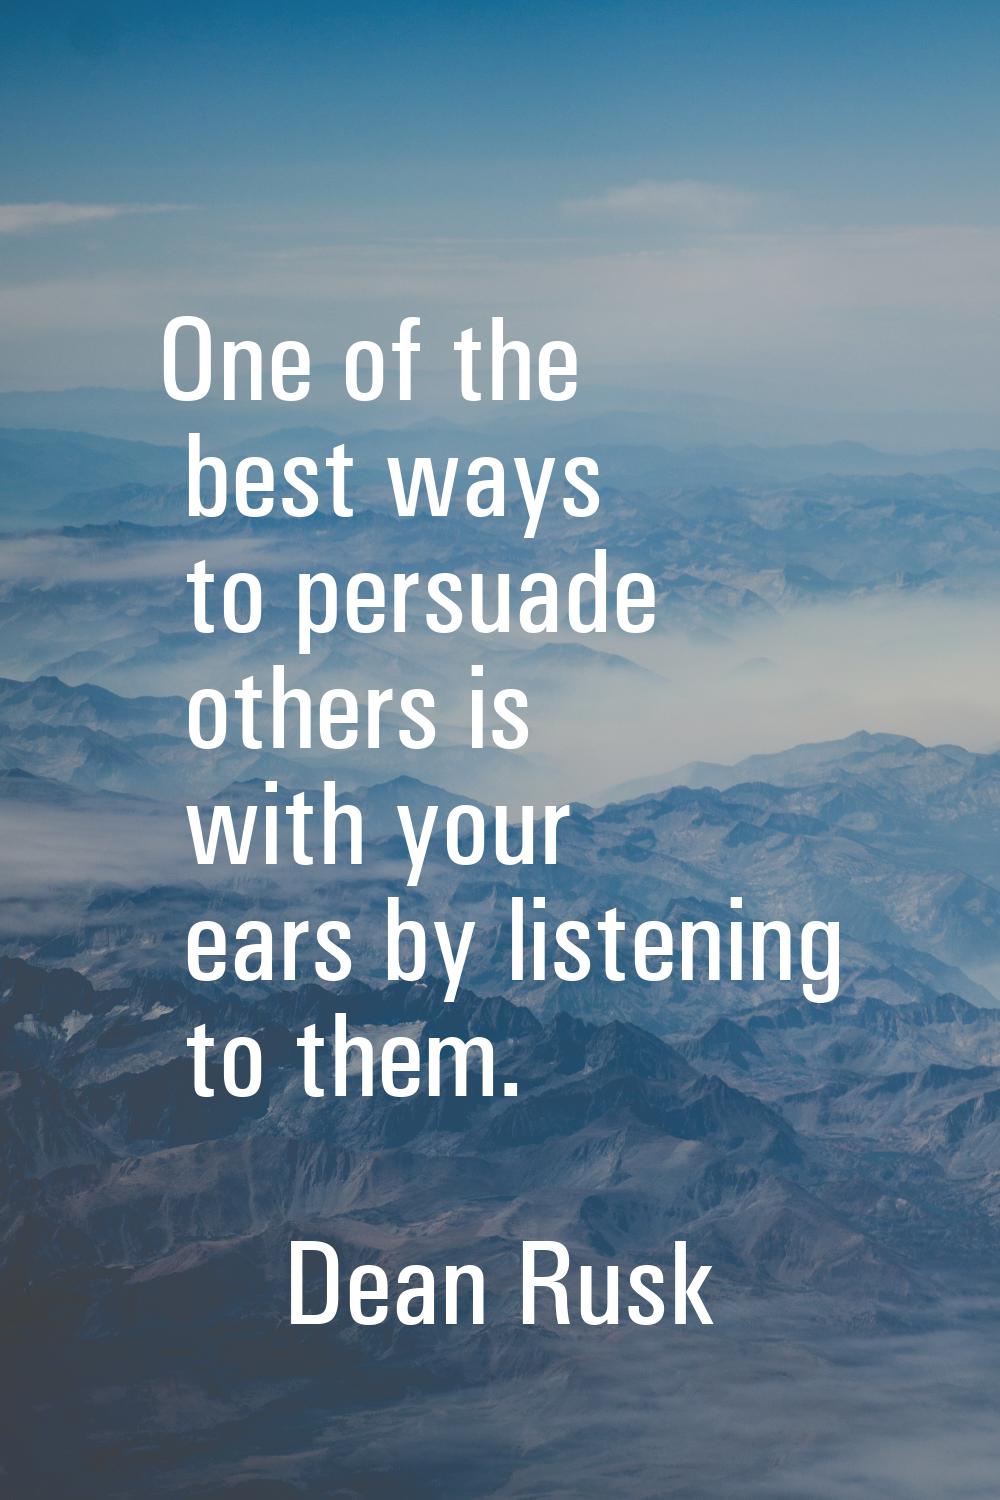 One of the best ways to persuade others is with your ears by listening to them.